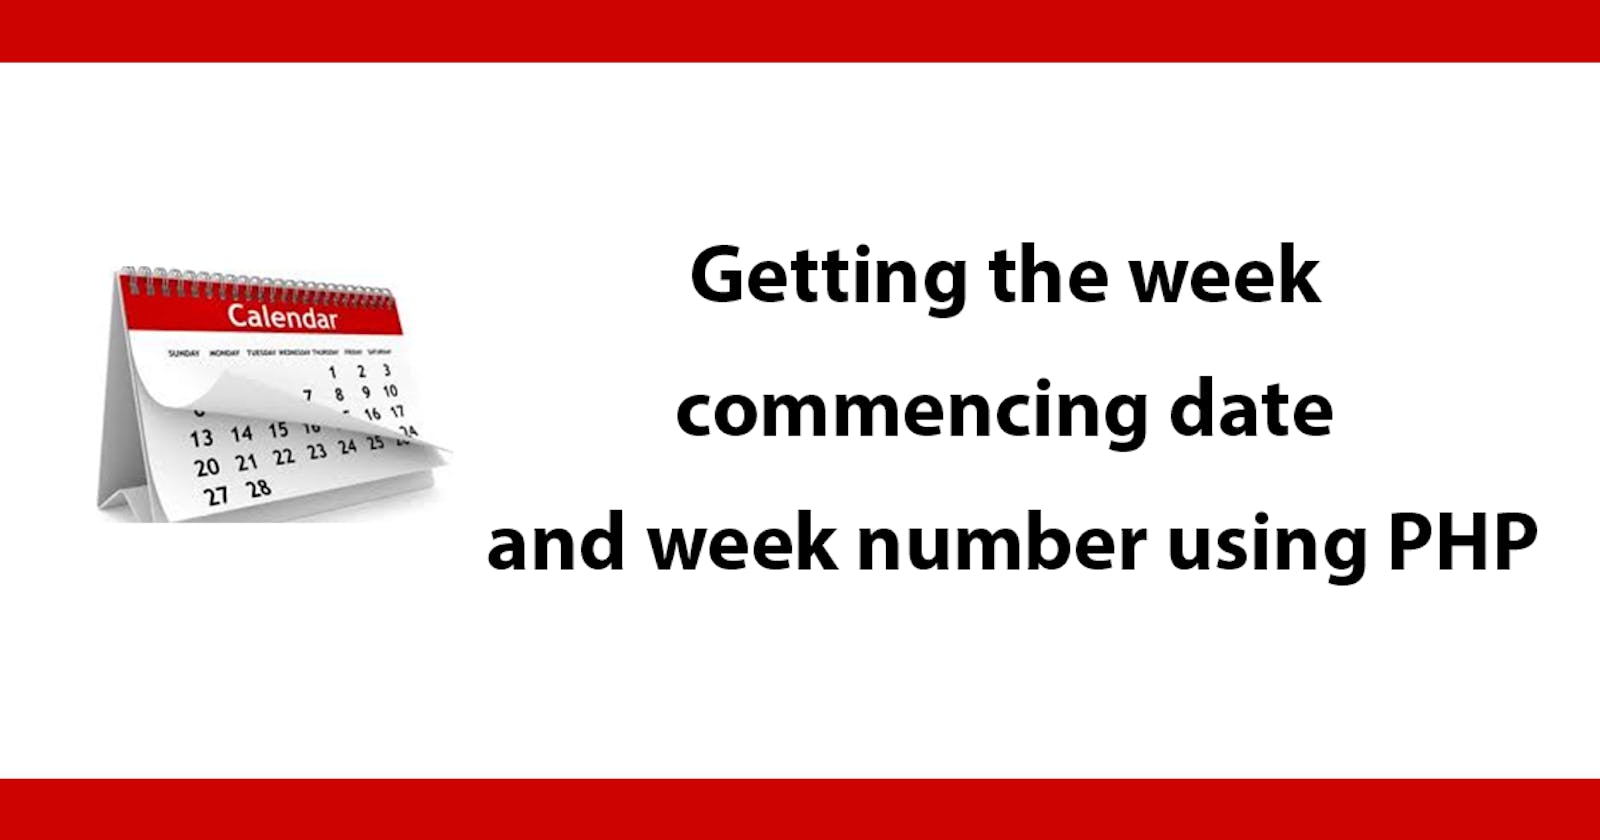 Getting the week commencing date and week number using PHP